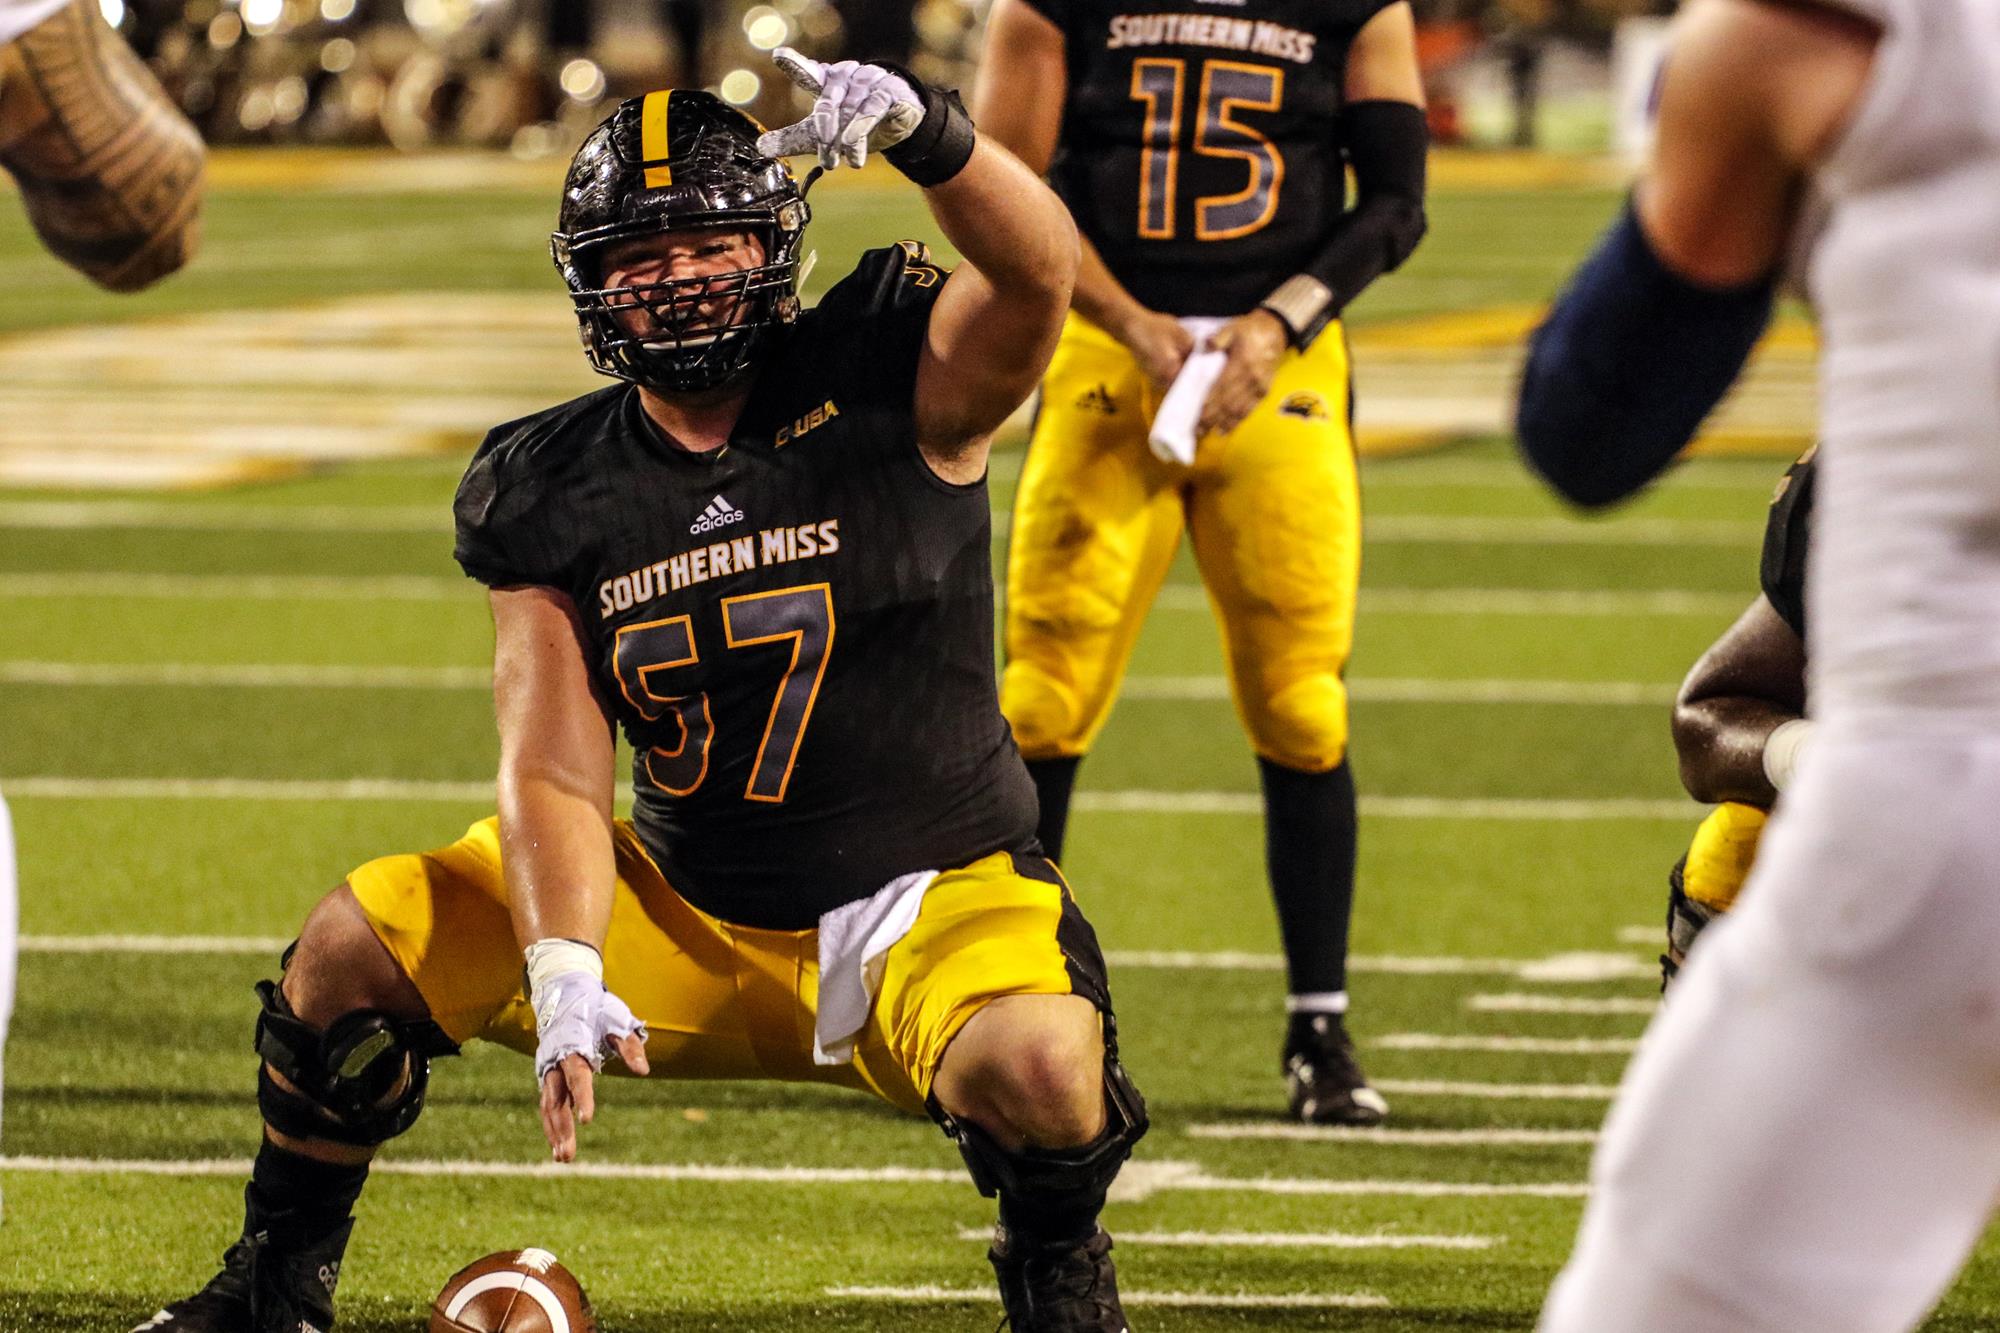 Southern Miss center gives up football in pursuit of military career